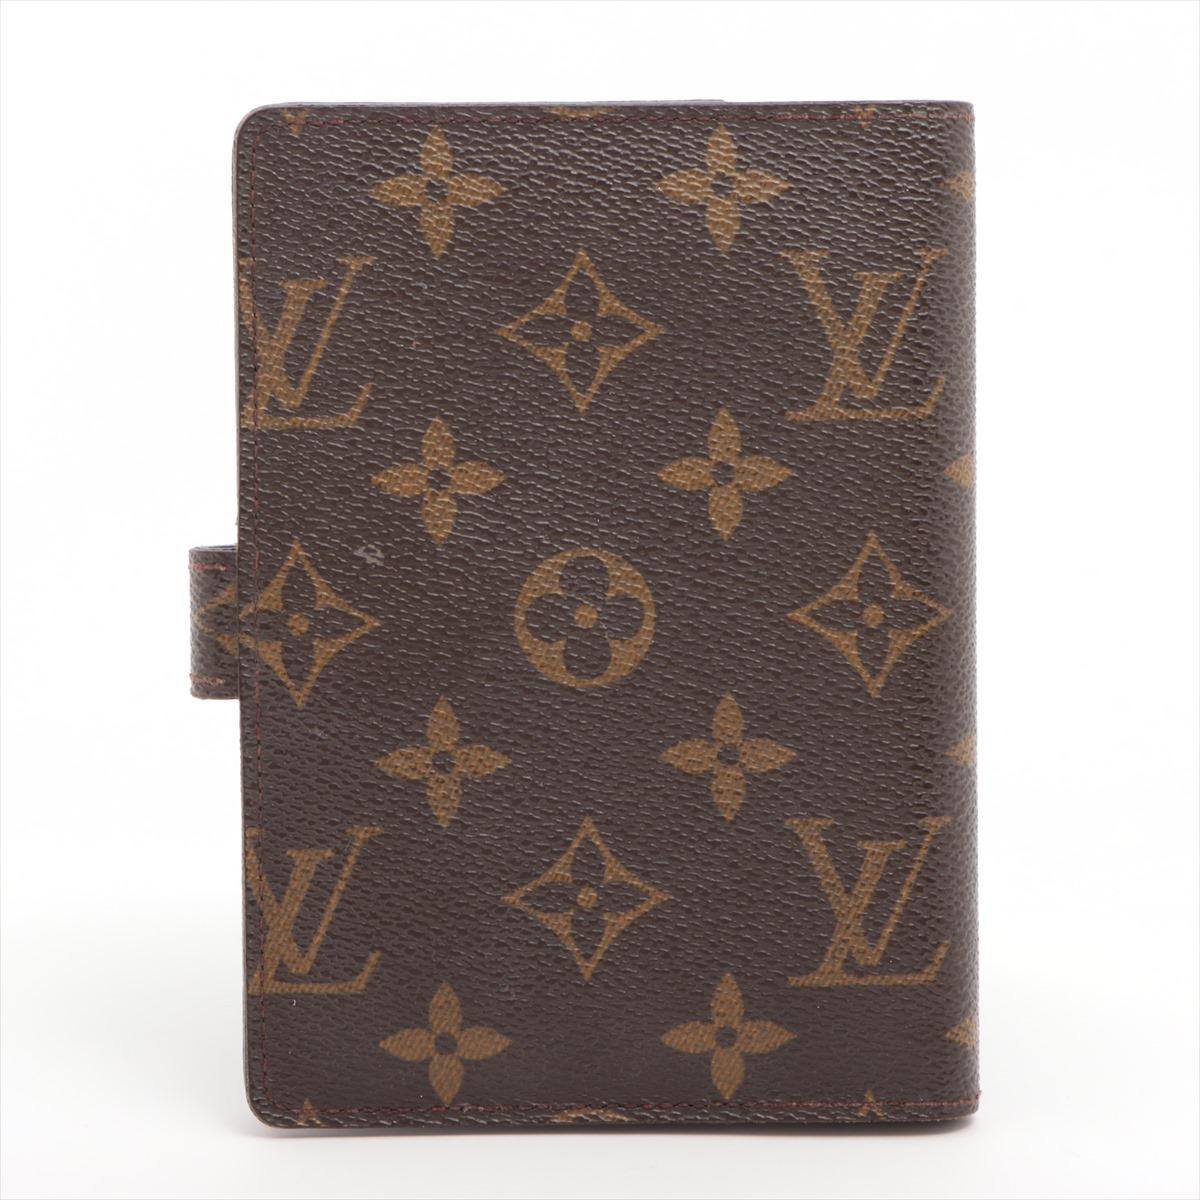 Louis Vuitton Monogram Agenda PM In Good Condition For Sale In Indianapolis, IN